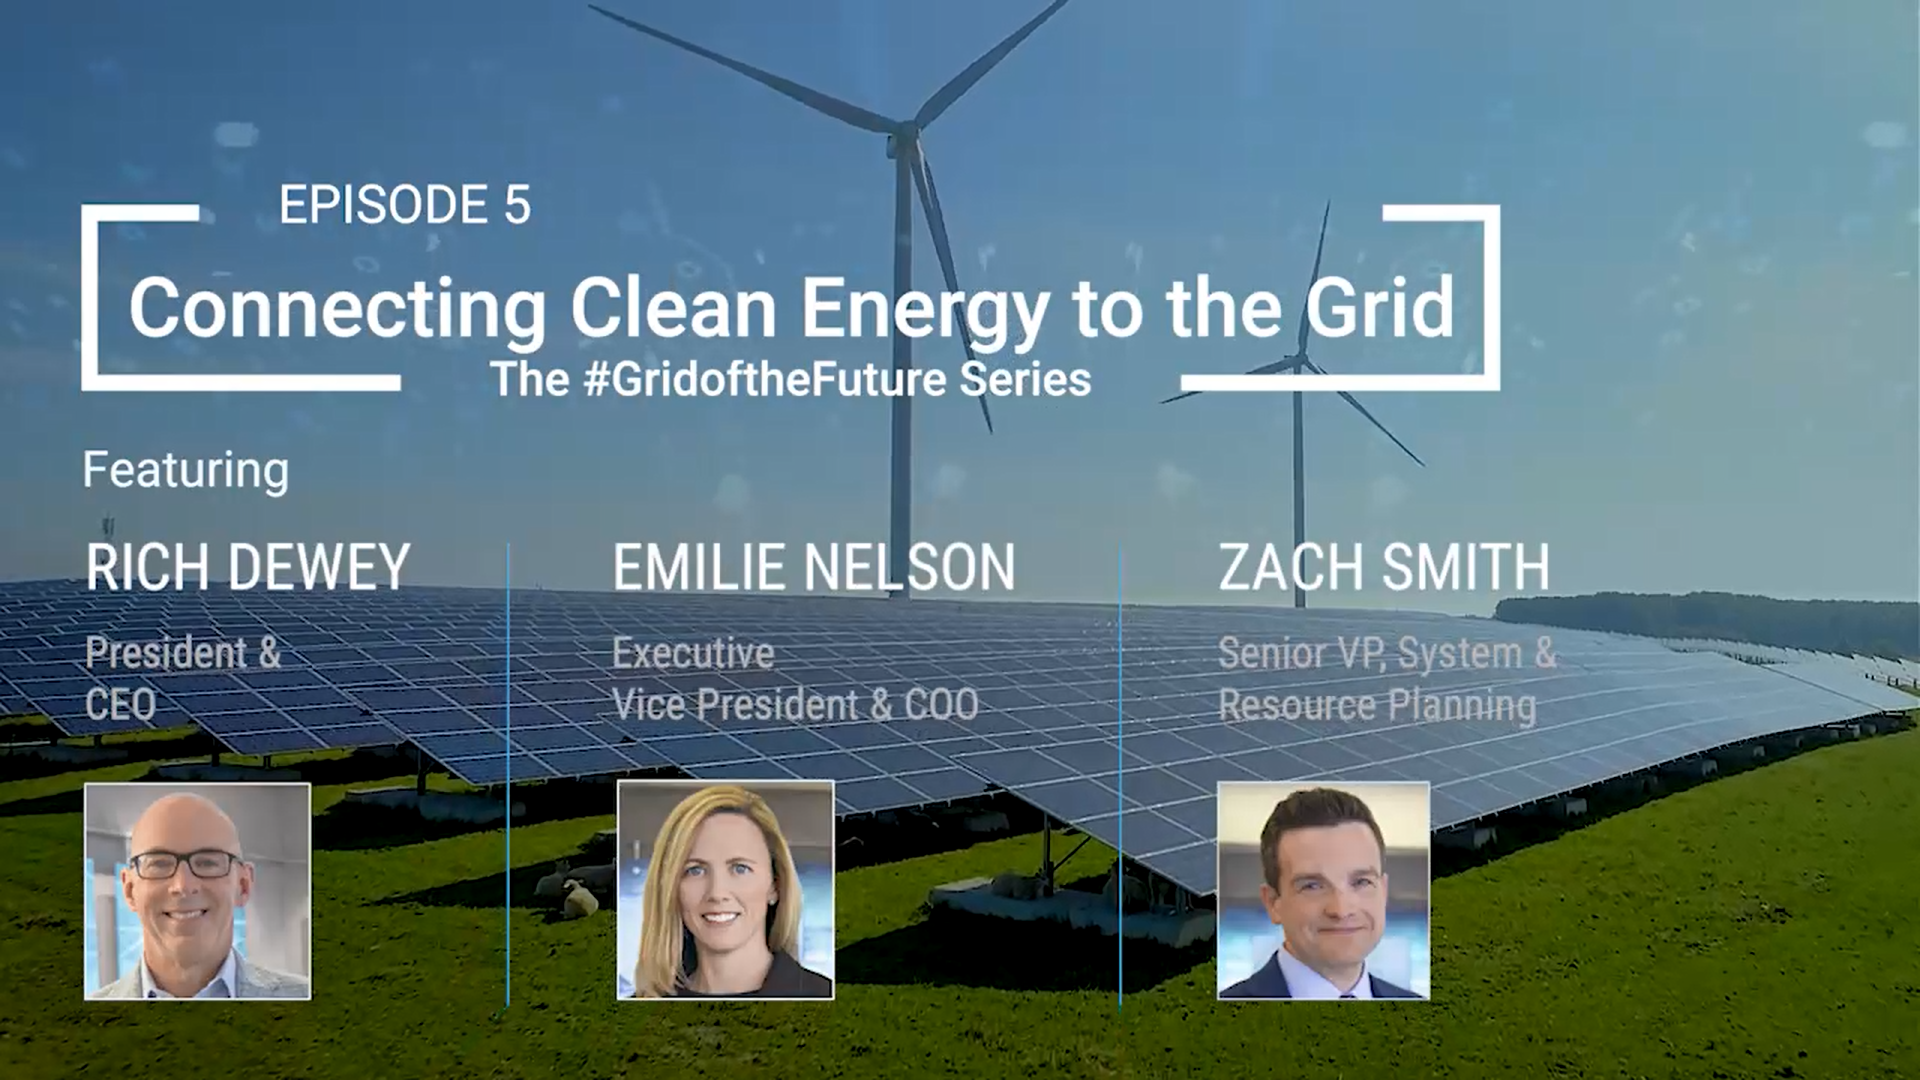 VIDEO: Episode 5: Connecting Clean Energy to the Grid